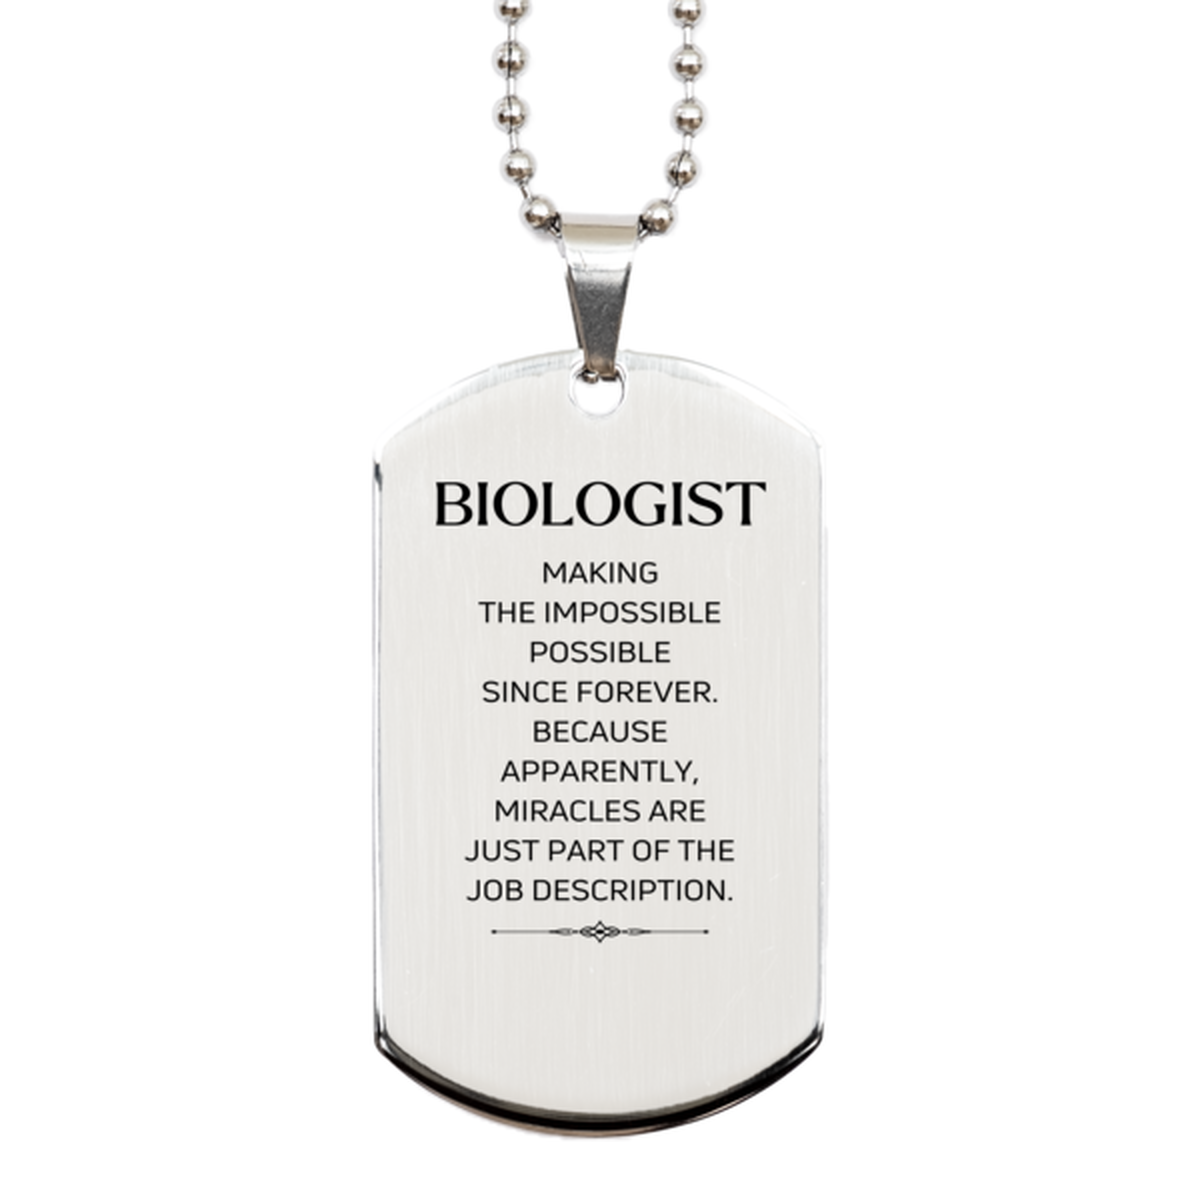 Funny Biologist Gifts, Miracles are just part of the job description, Inspirational Birthday Silver Dog Tag For Biologist, Men, Women, Coworkers, Friends, Boss